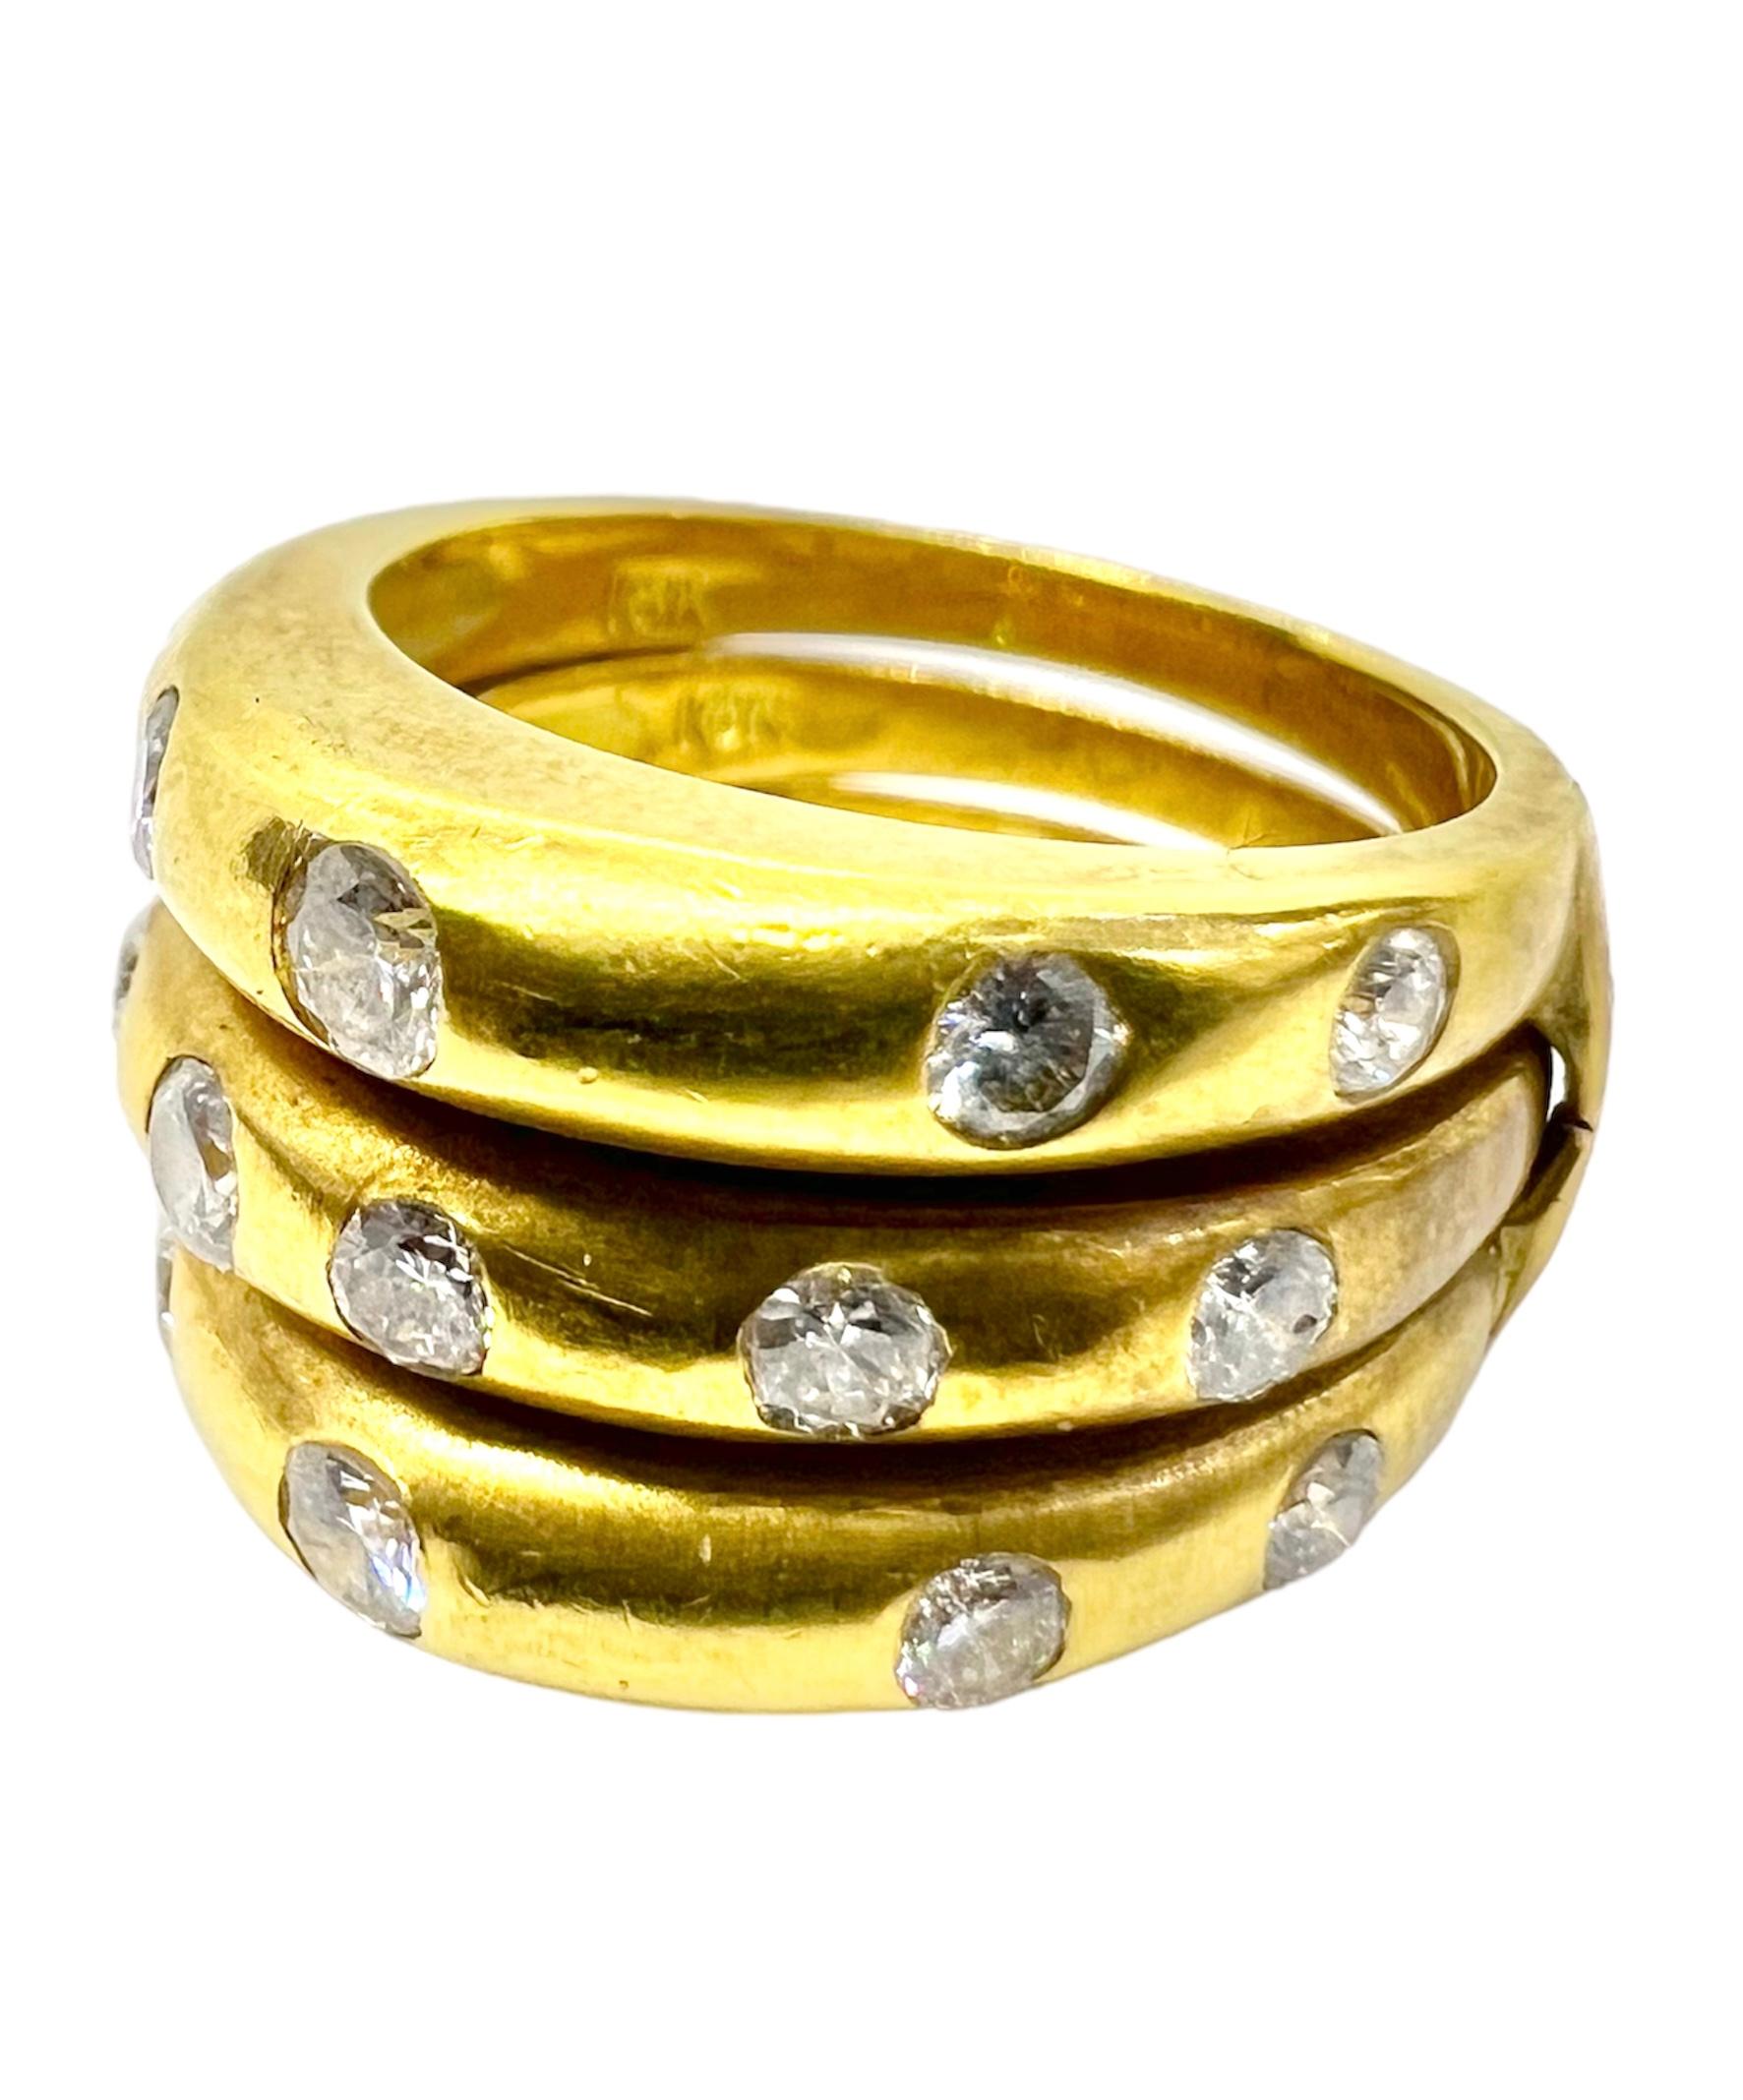 18K yellow gold detachable ring with round diamonds.

Sophia D by Joseph Dardashti LTD has been known worldwide for 35 years and are inspired by classic Art Deco design that merges with modern manufacturing techniques.  